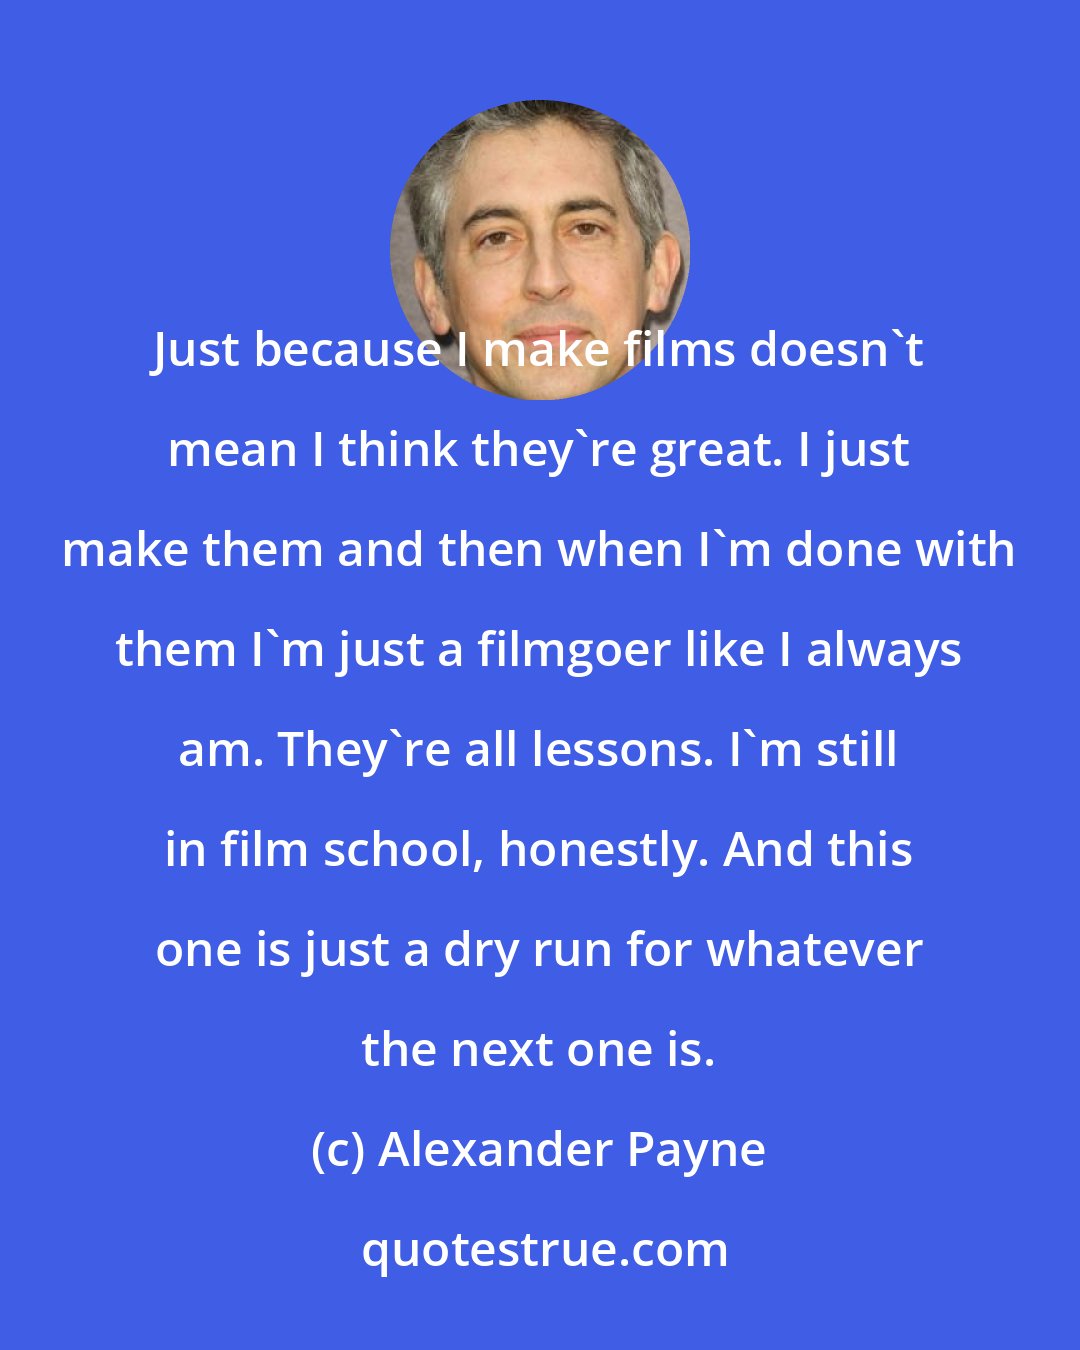 Alexander Payne: Just because I make films doesn't mean I think they're great. I just make them and then when I'm done with them I'm just a filmgoer like I always am. They're all lessons. I'm still in film school, honestly. And this one is just a dry run for whatever the next one is.